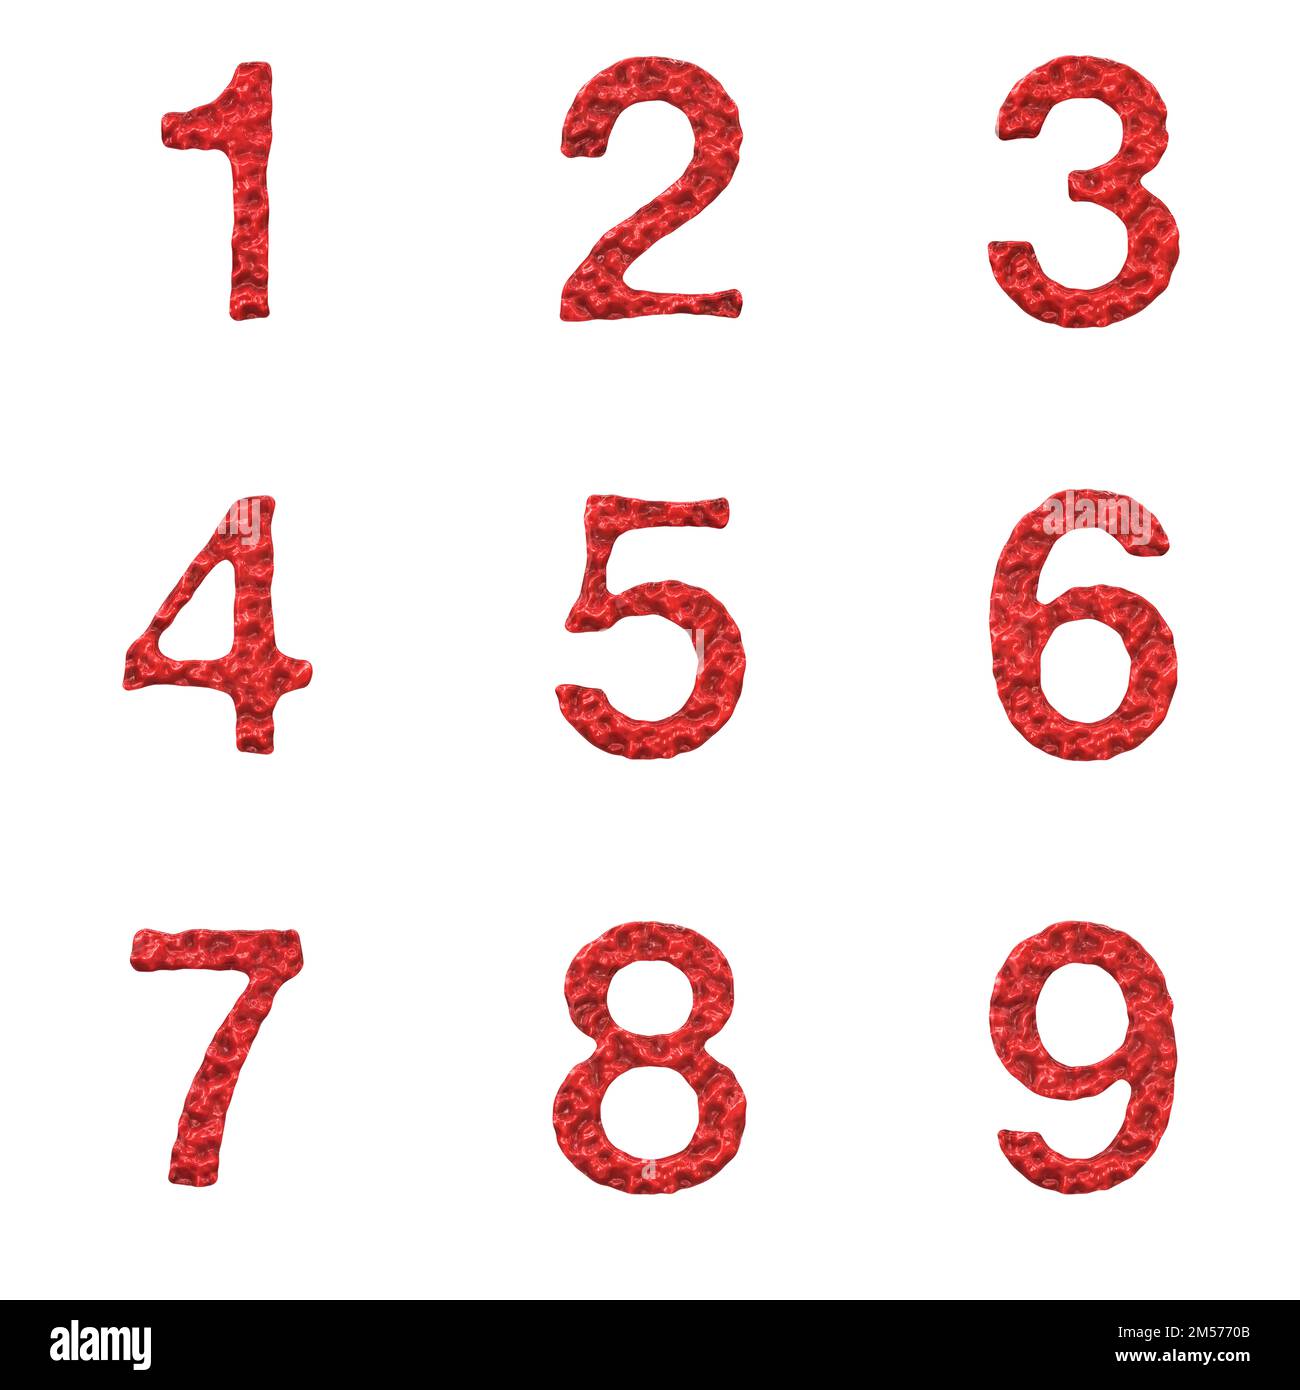 3D Rendering Set of Bloody Font Alphabet, Numbers and Punctutation Marks isolated on white background including path. Stock Photo